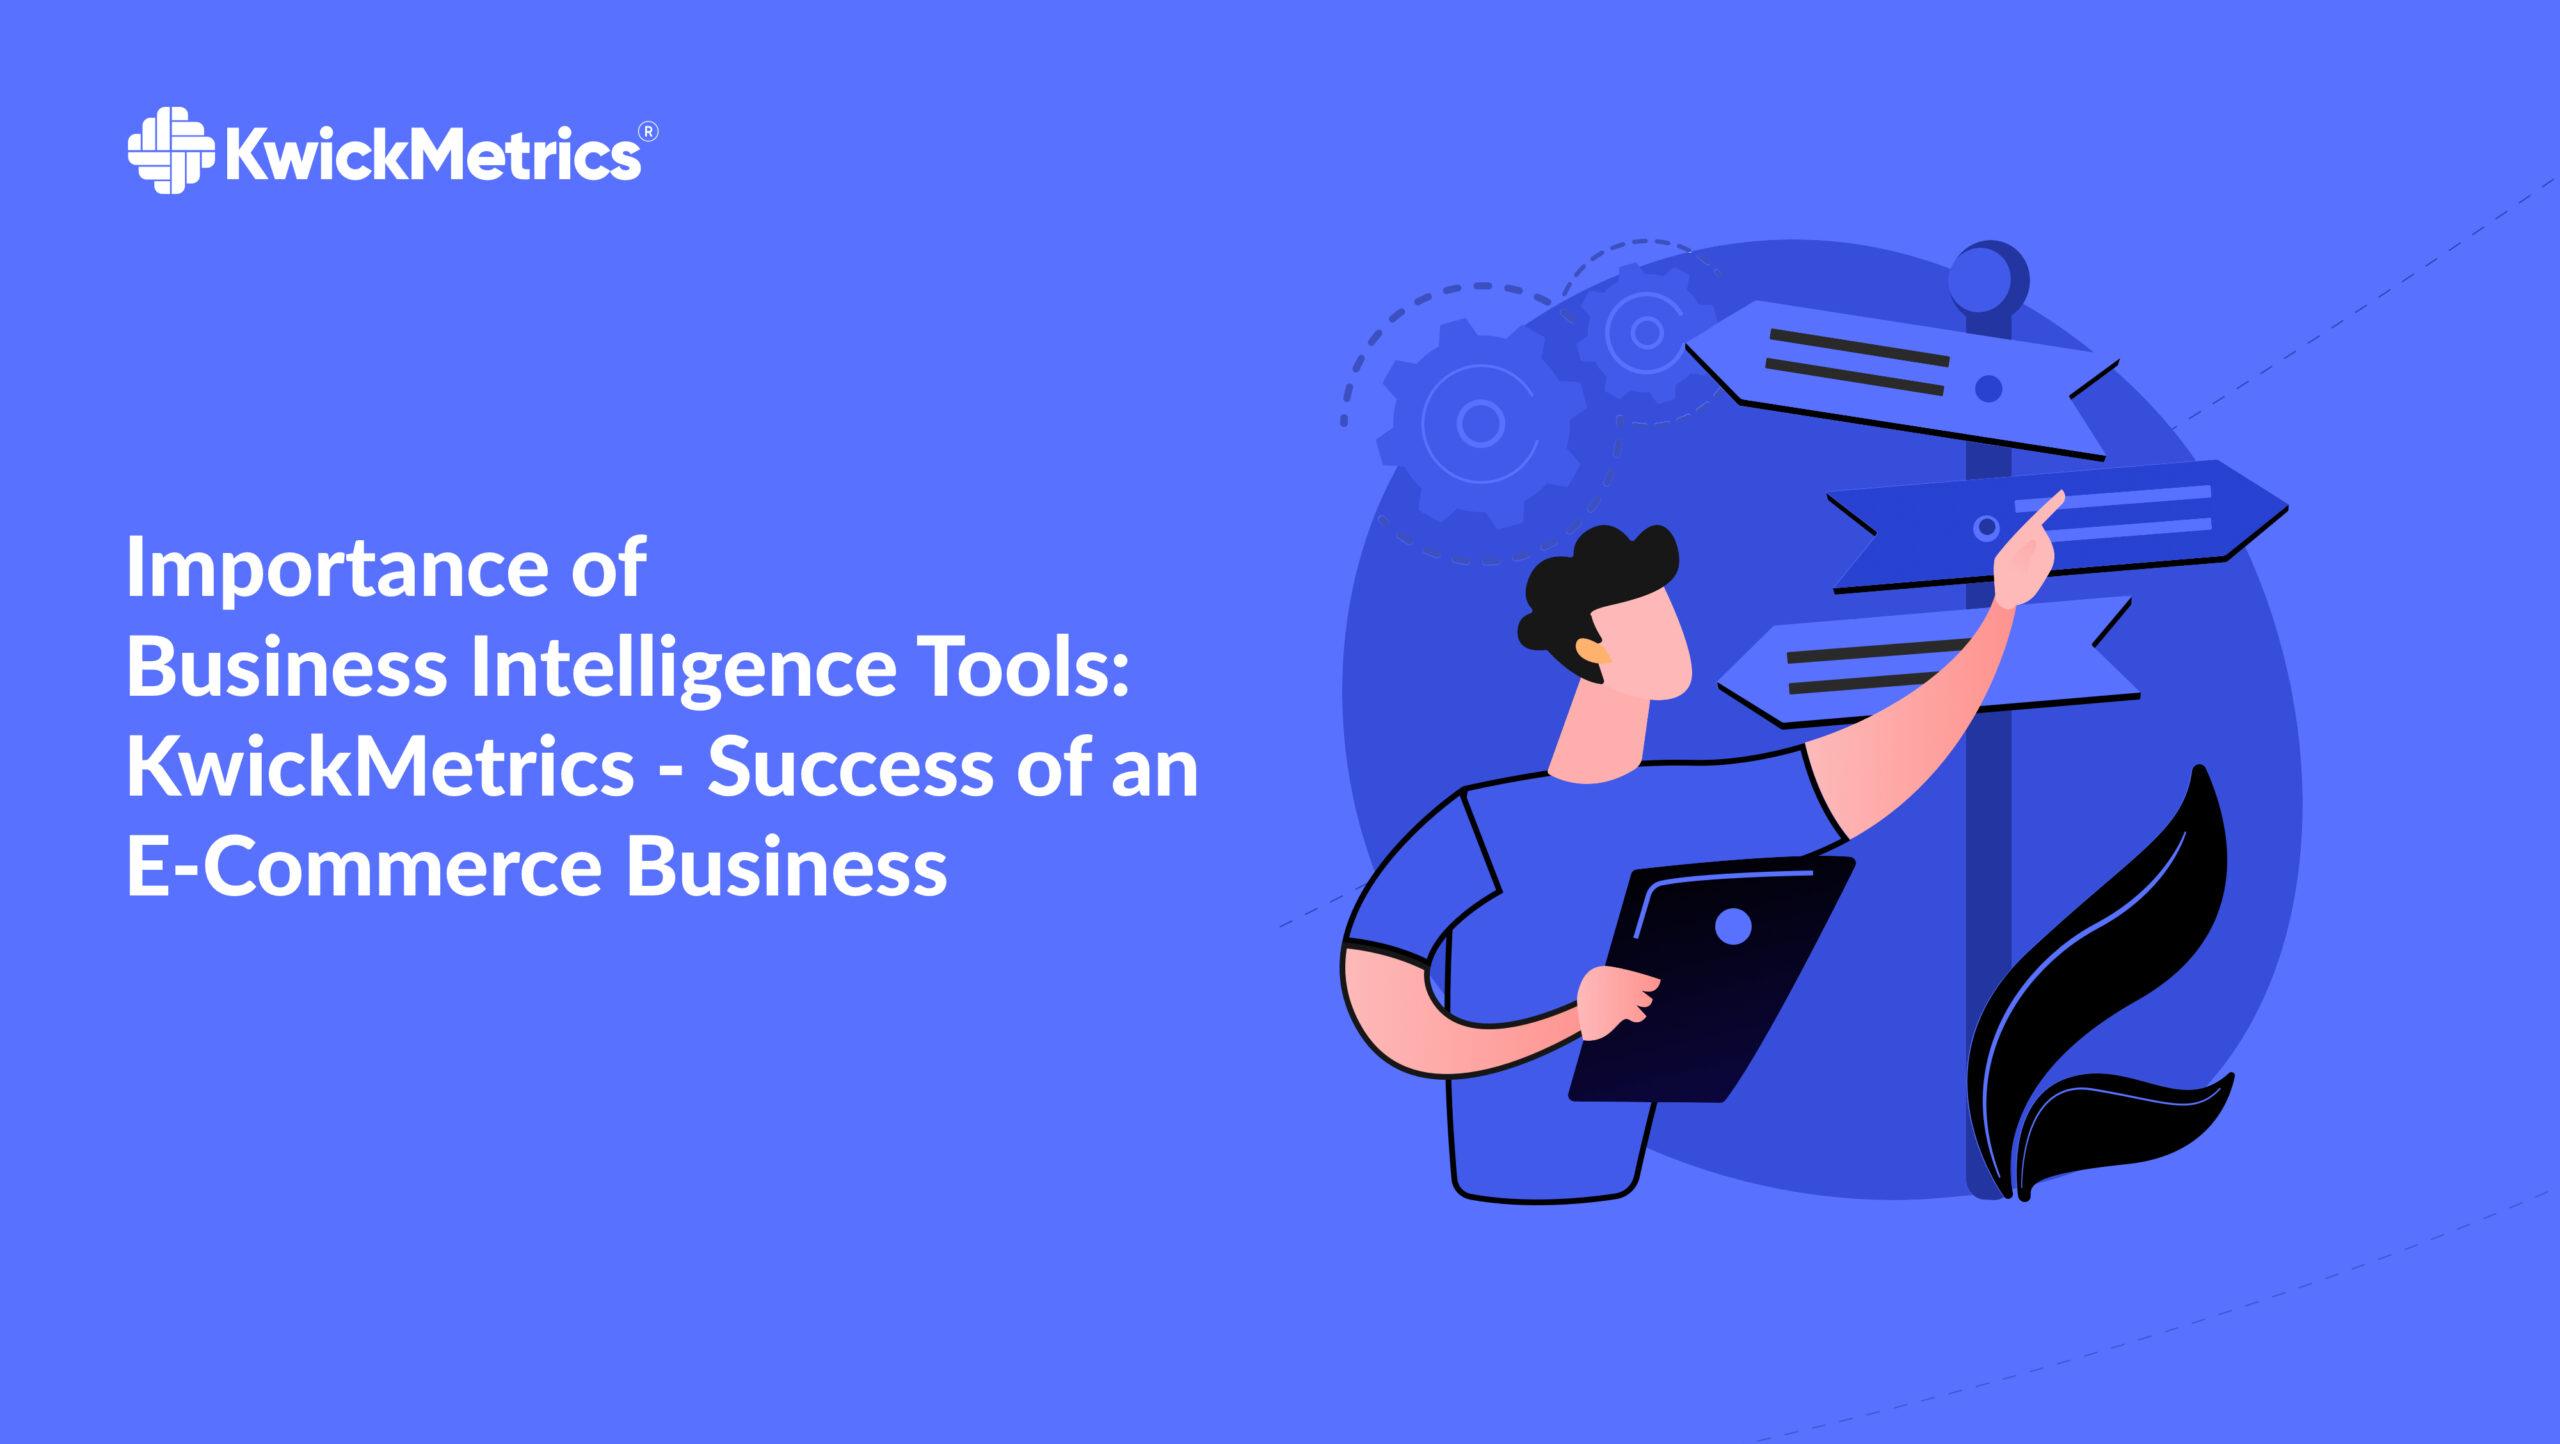 business-intelligence-tools-like-kwickmetrics-in-the-success-of-e-commerce-business